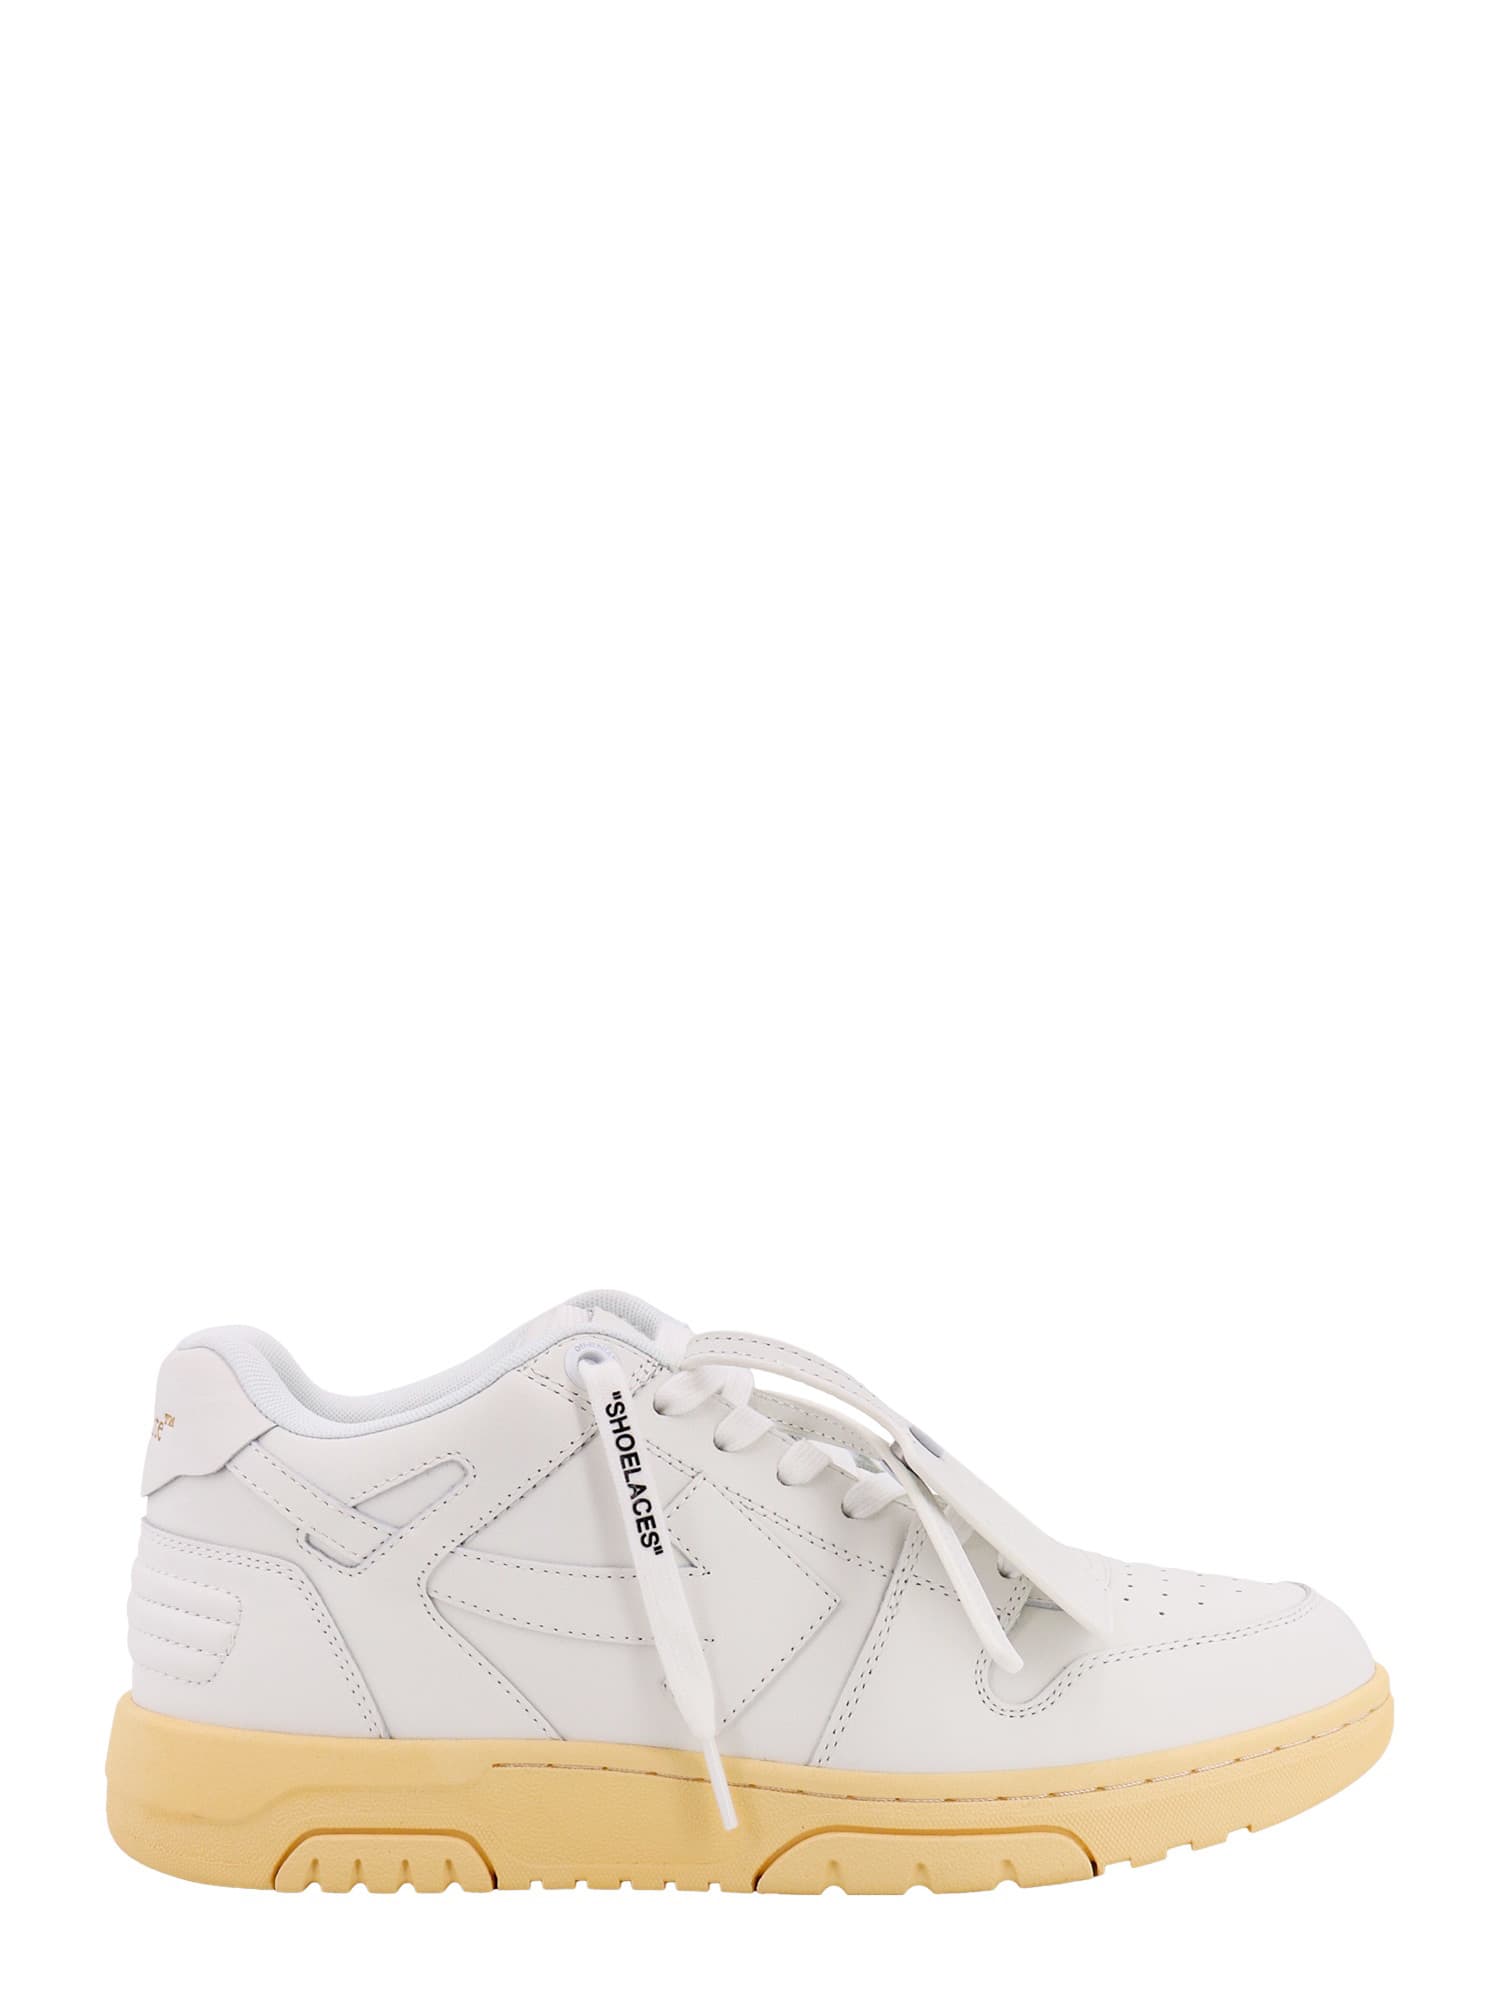 Off-White Women's Out of Office Leather Sneakers